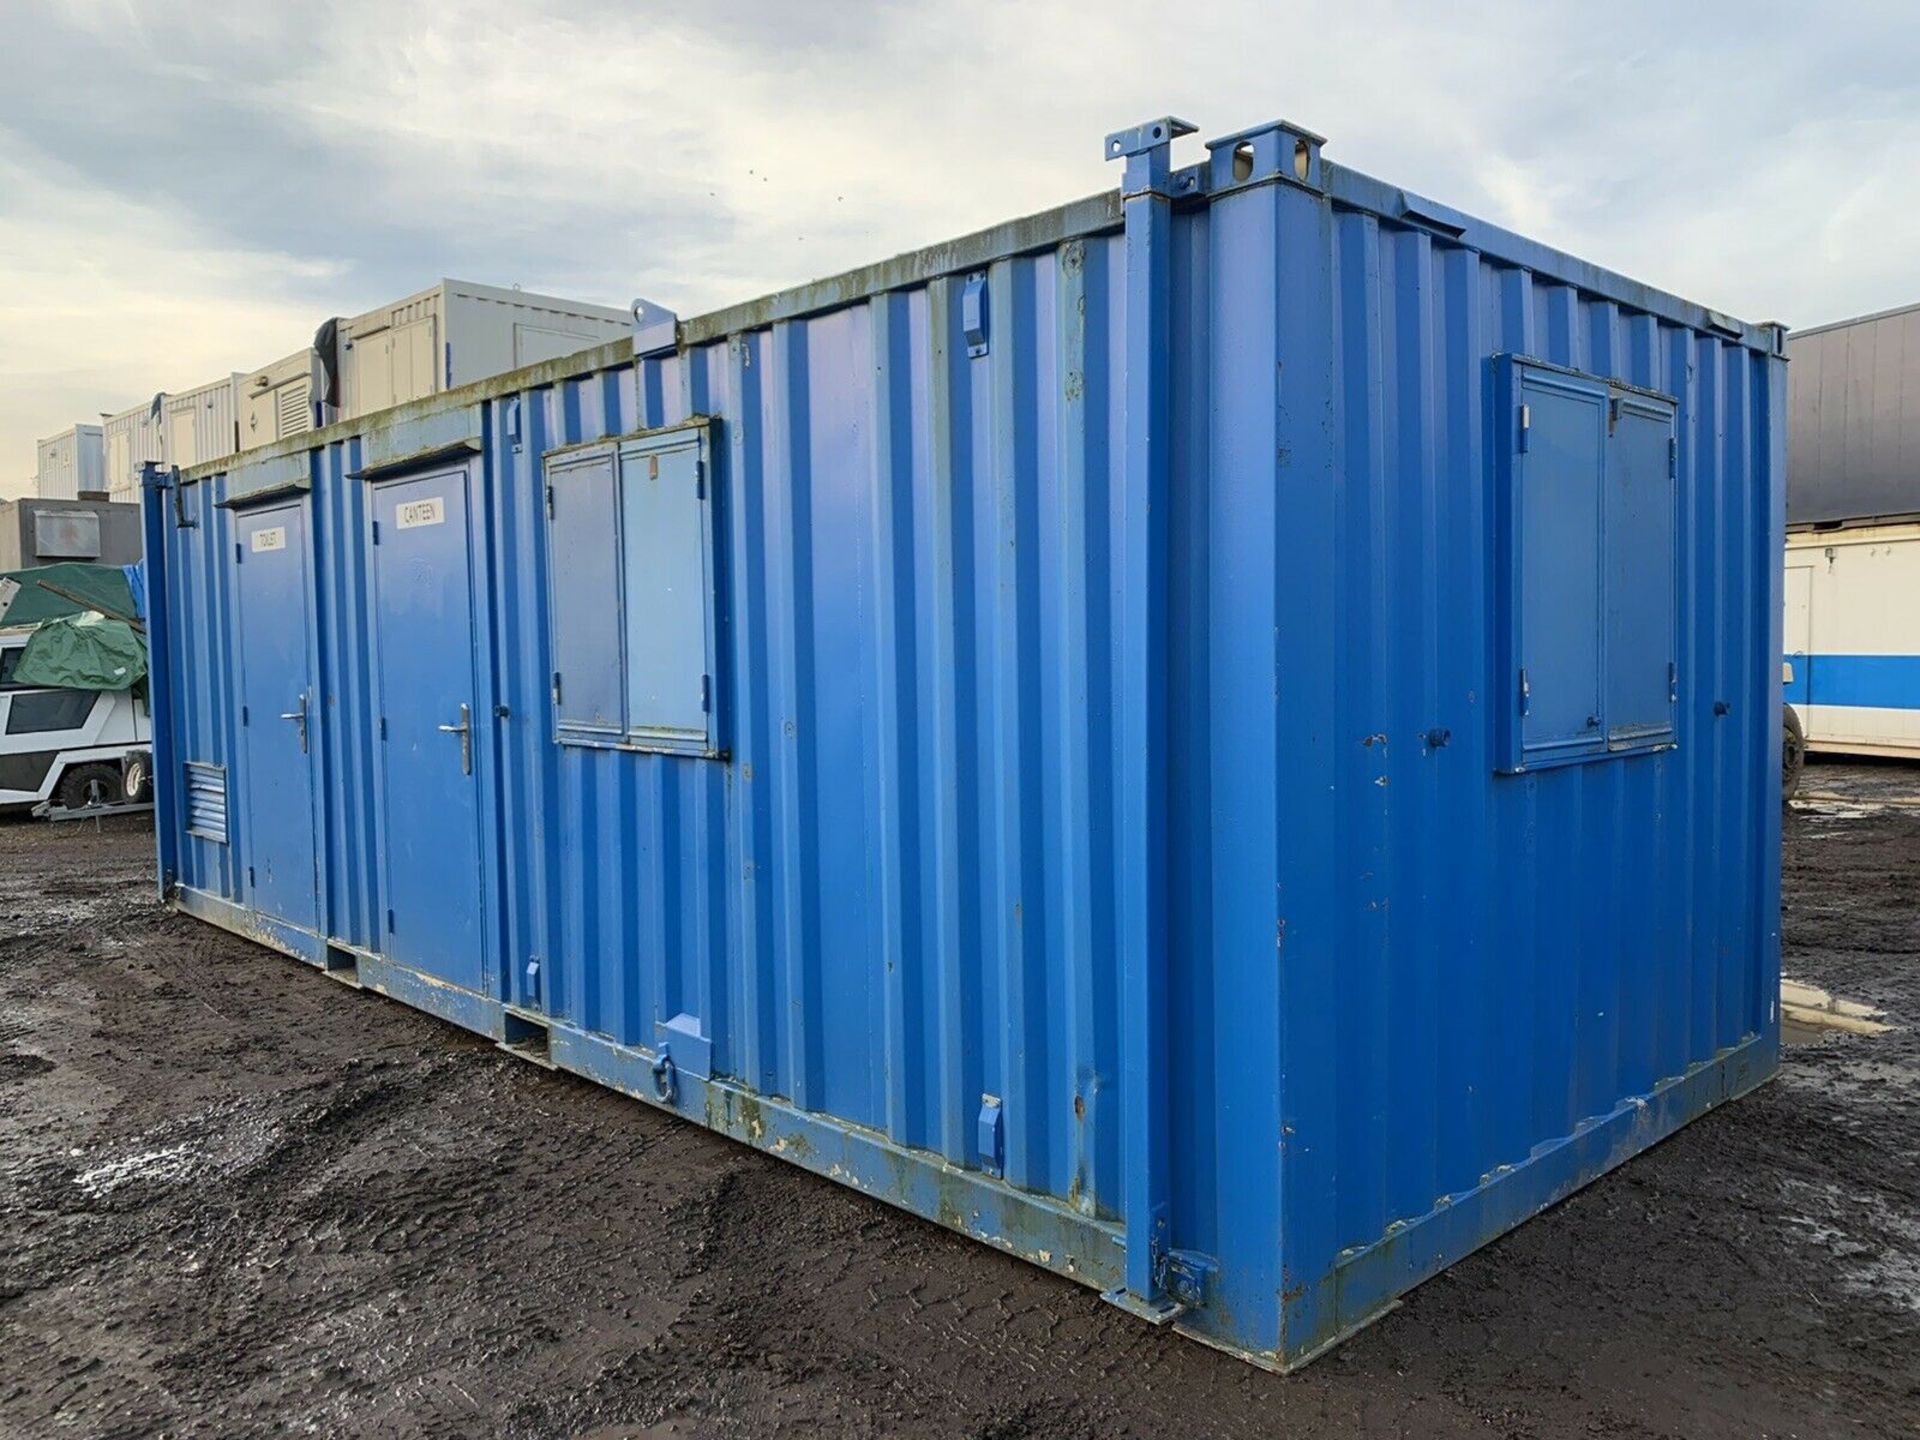 Anti Vandal Steel Portable Welfare Unit Complete With Generator 26ft x 10ft - Image 3 of 10